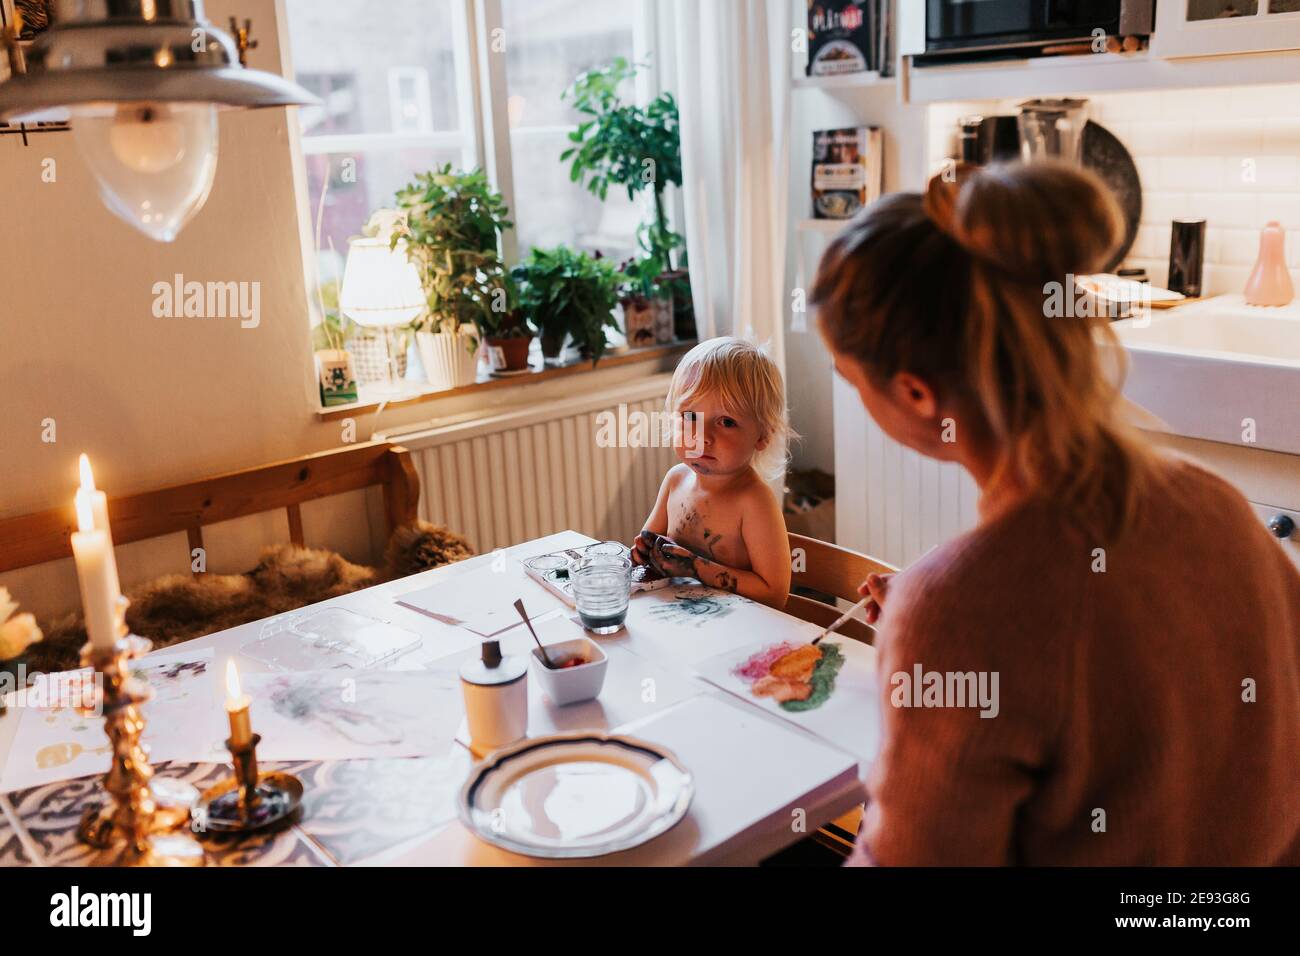 Mother and toddler painting at table Stock Photo